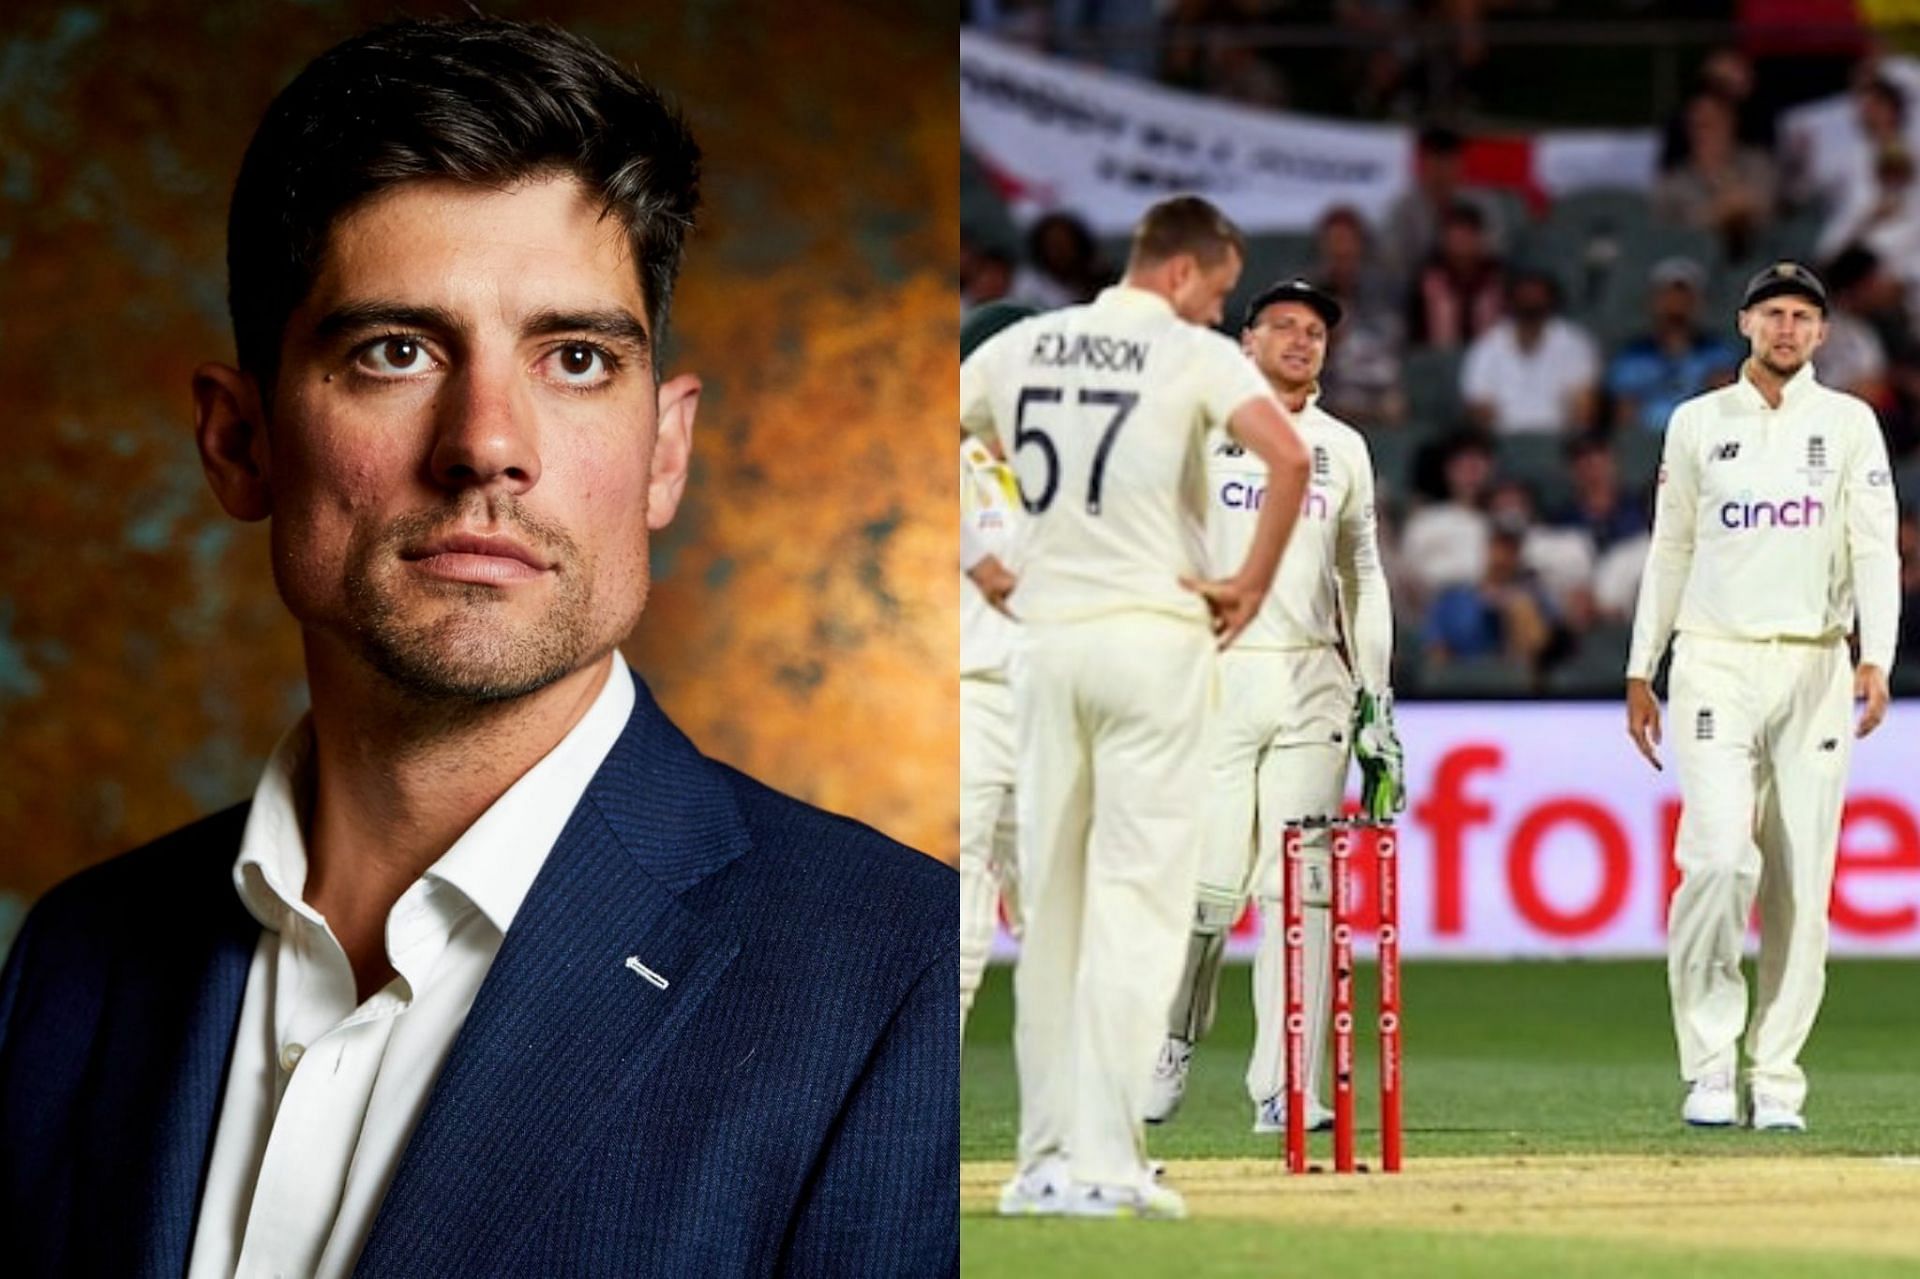 Sir Alastair Cook slams the England team following their defeat in the second Ashes Test.